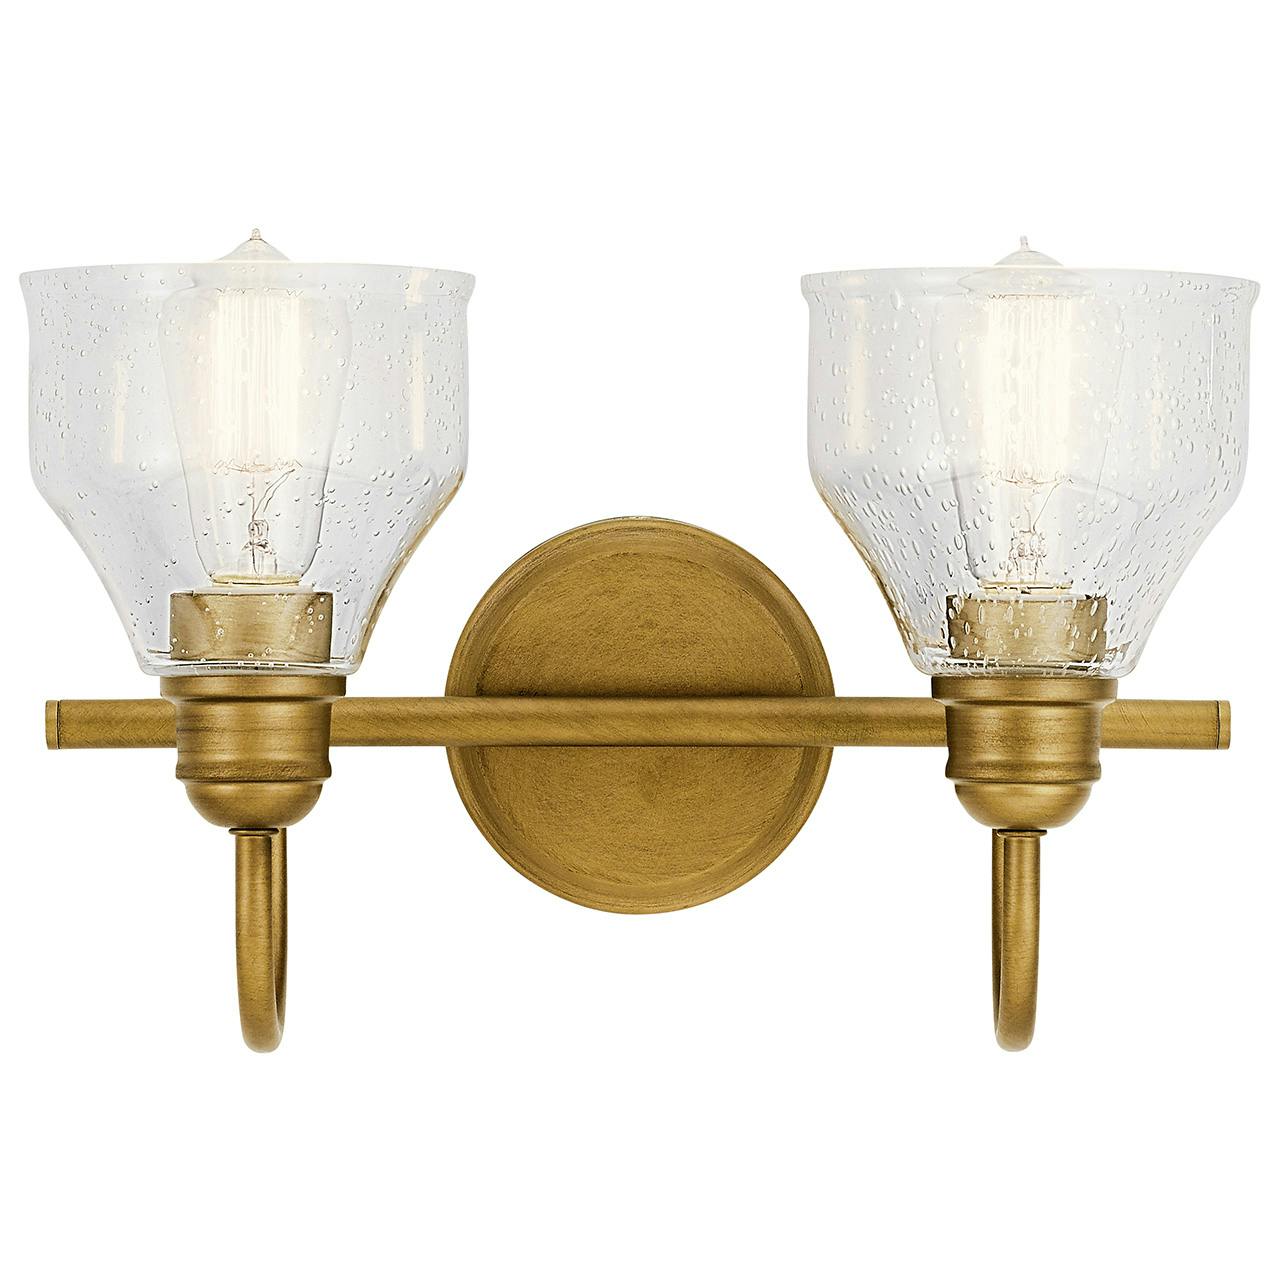 The Avery 2 Light Vanity Light Natural Brass facing up on a white background